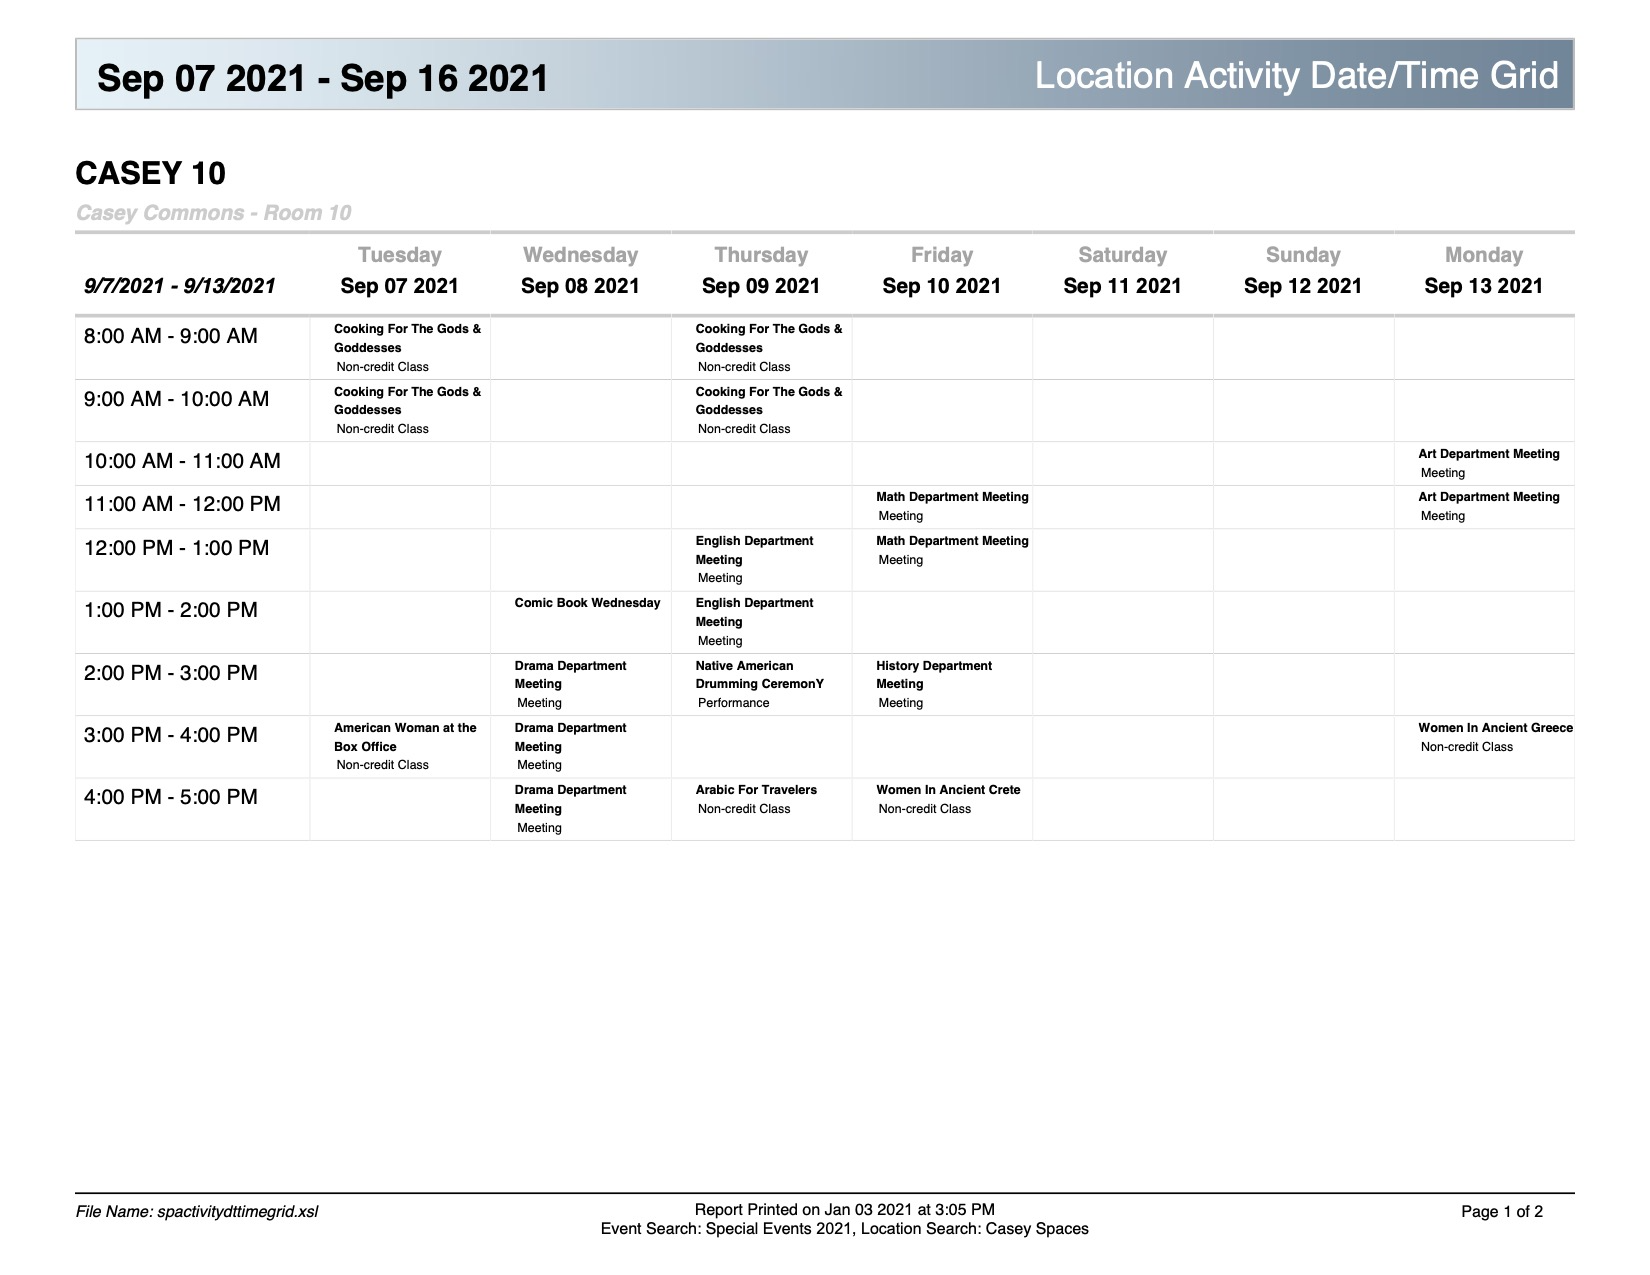 Location activity date/time grid example